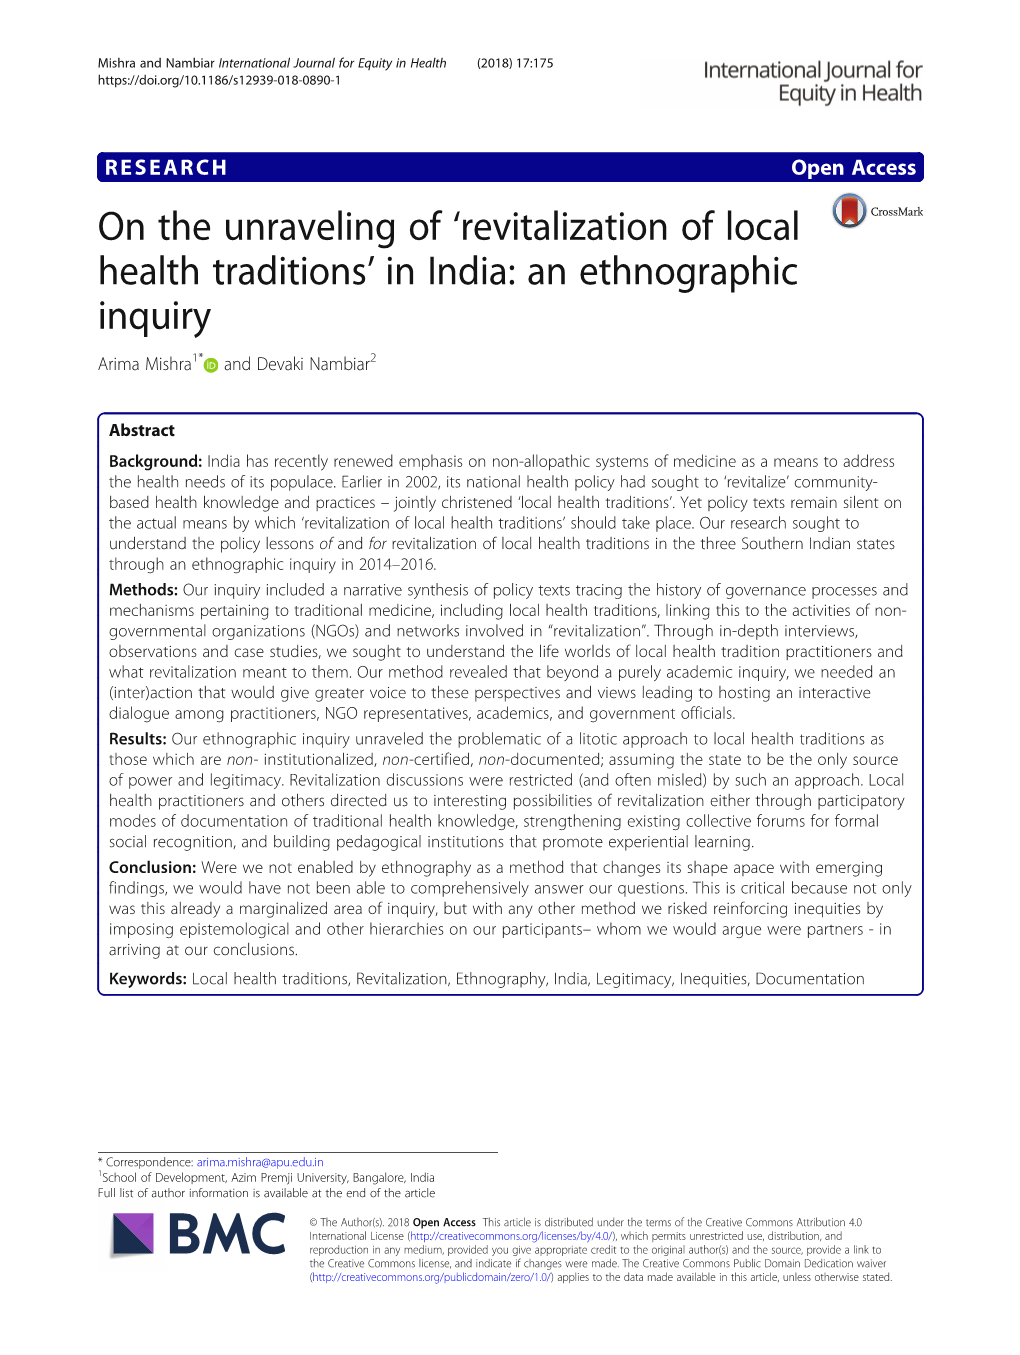 'Revitalization of Local Health Traditions' in India: an Ethnographic Inquiry